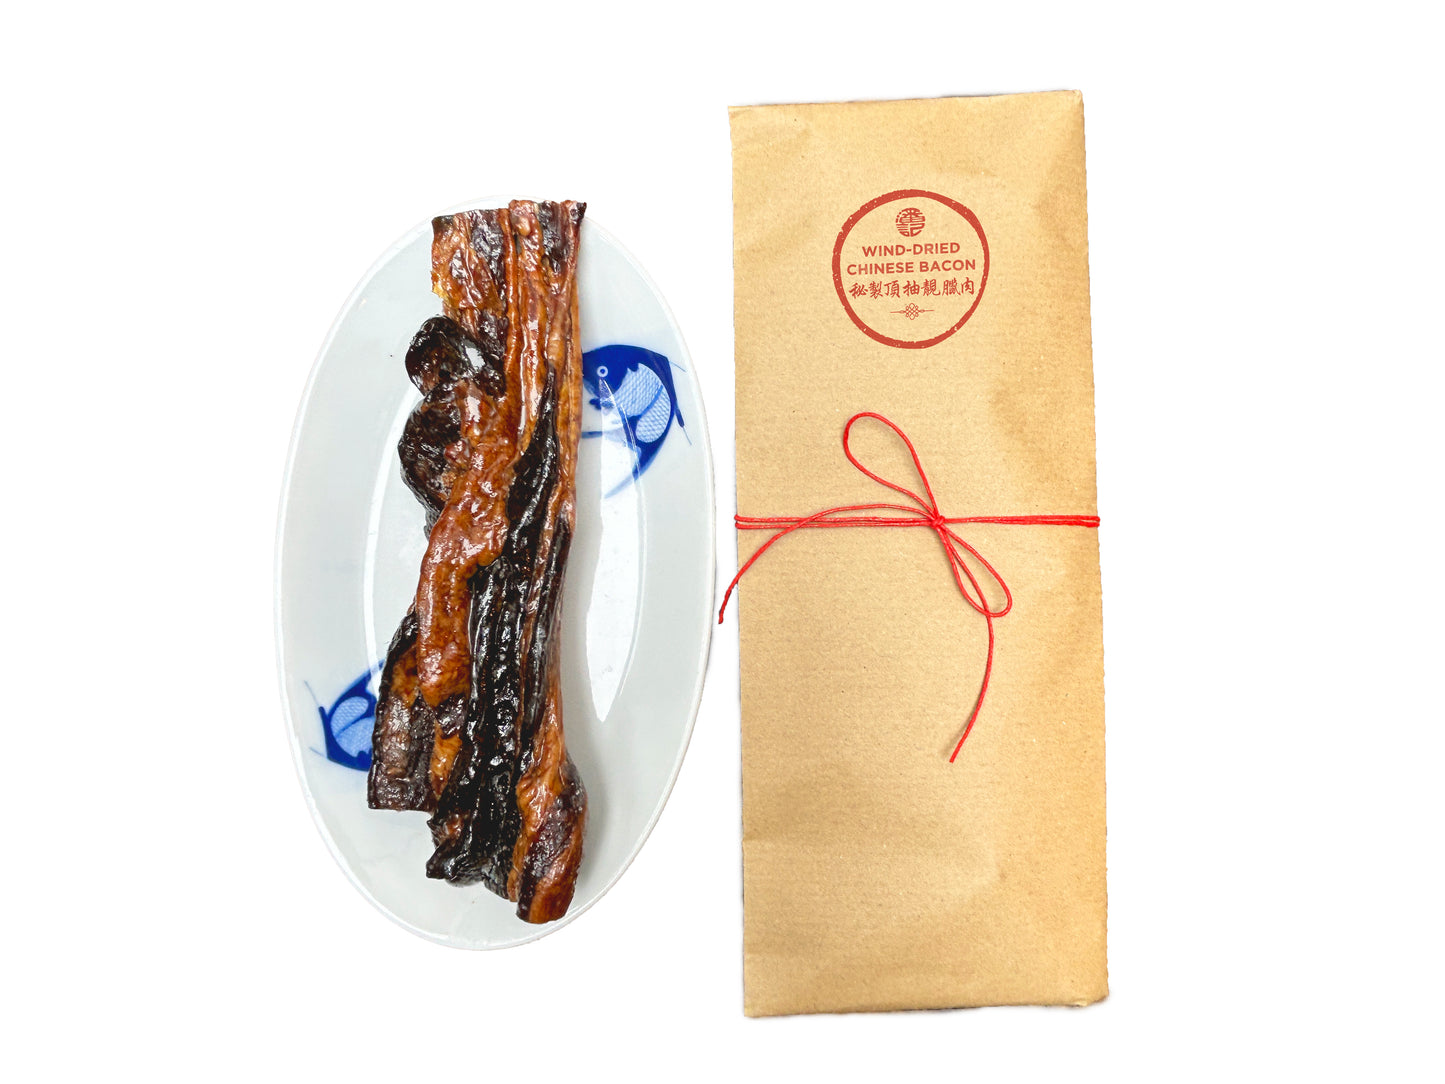 Poon's Wind-Dried Chinese Bacon